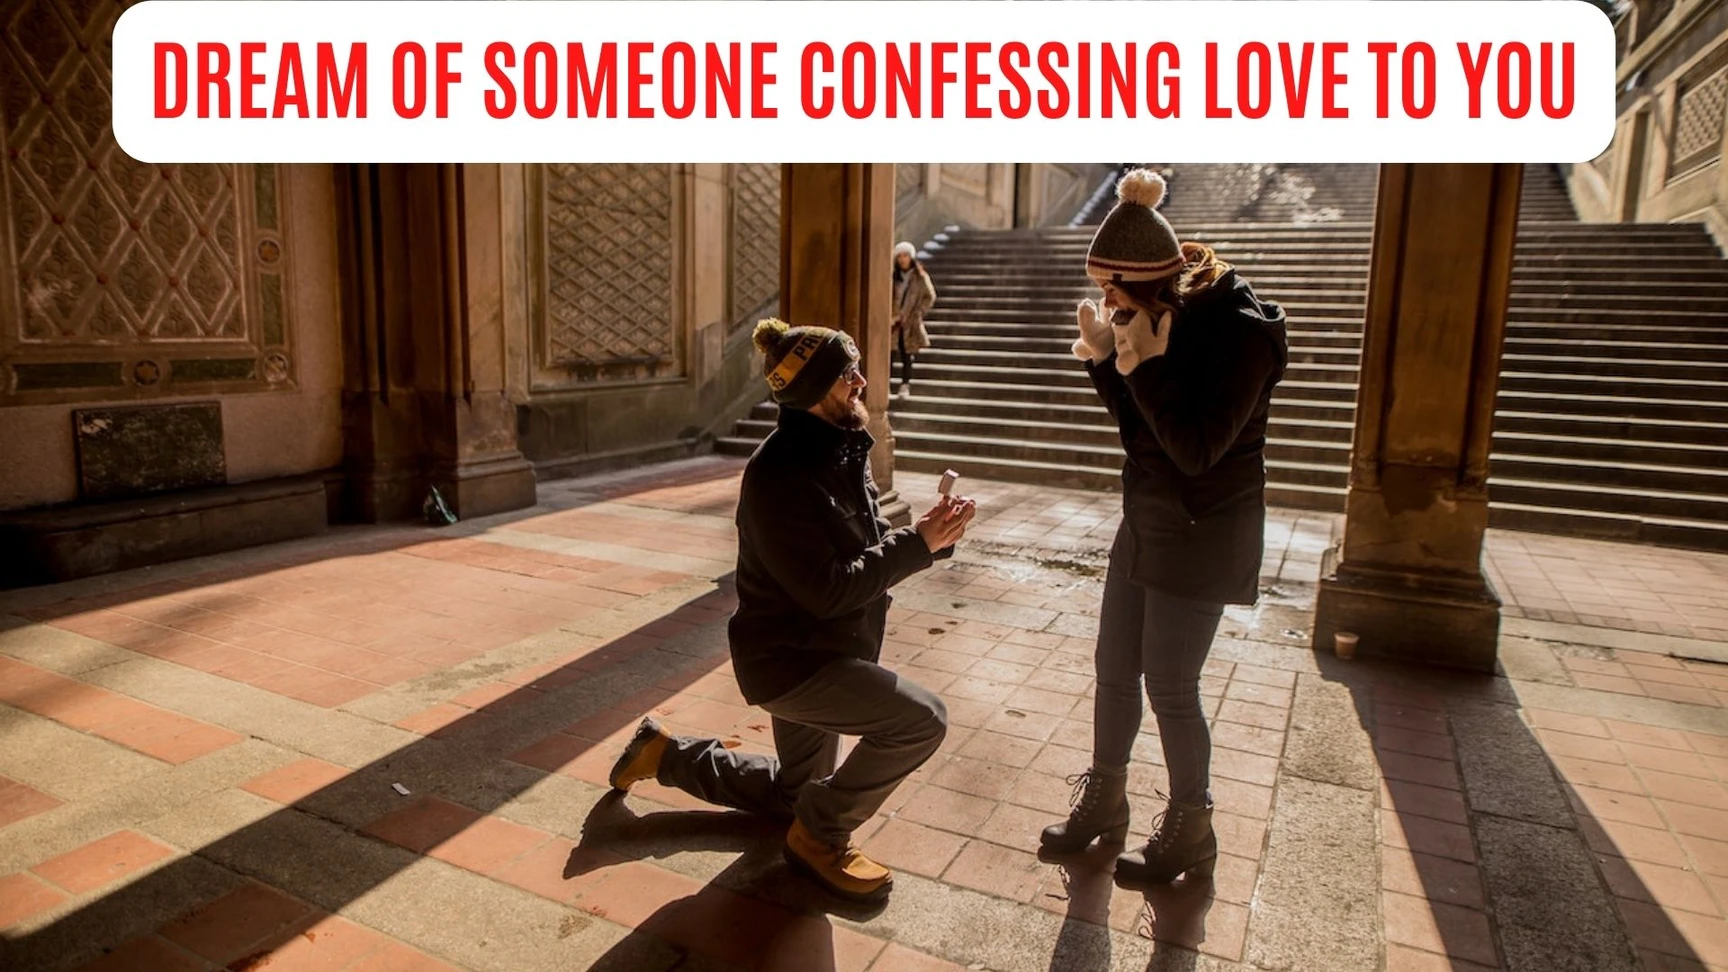 What Dreams Of Someone Confessing Love To You Could Mean